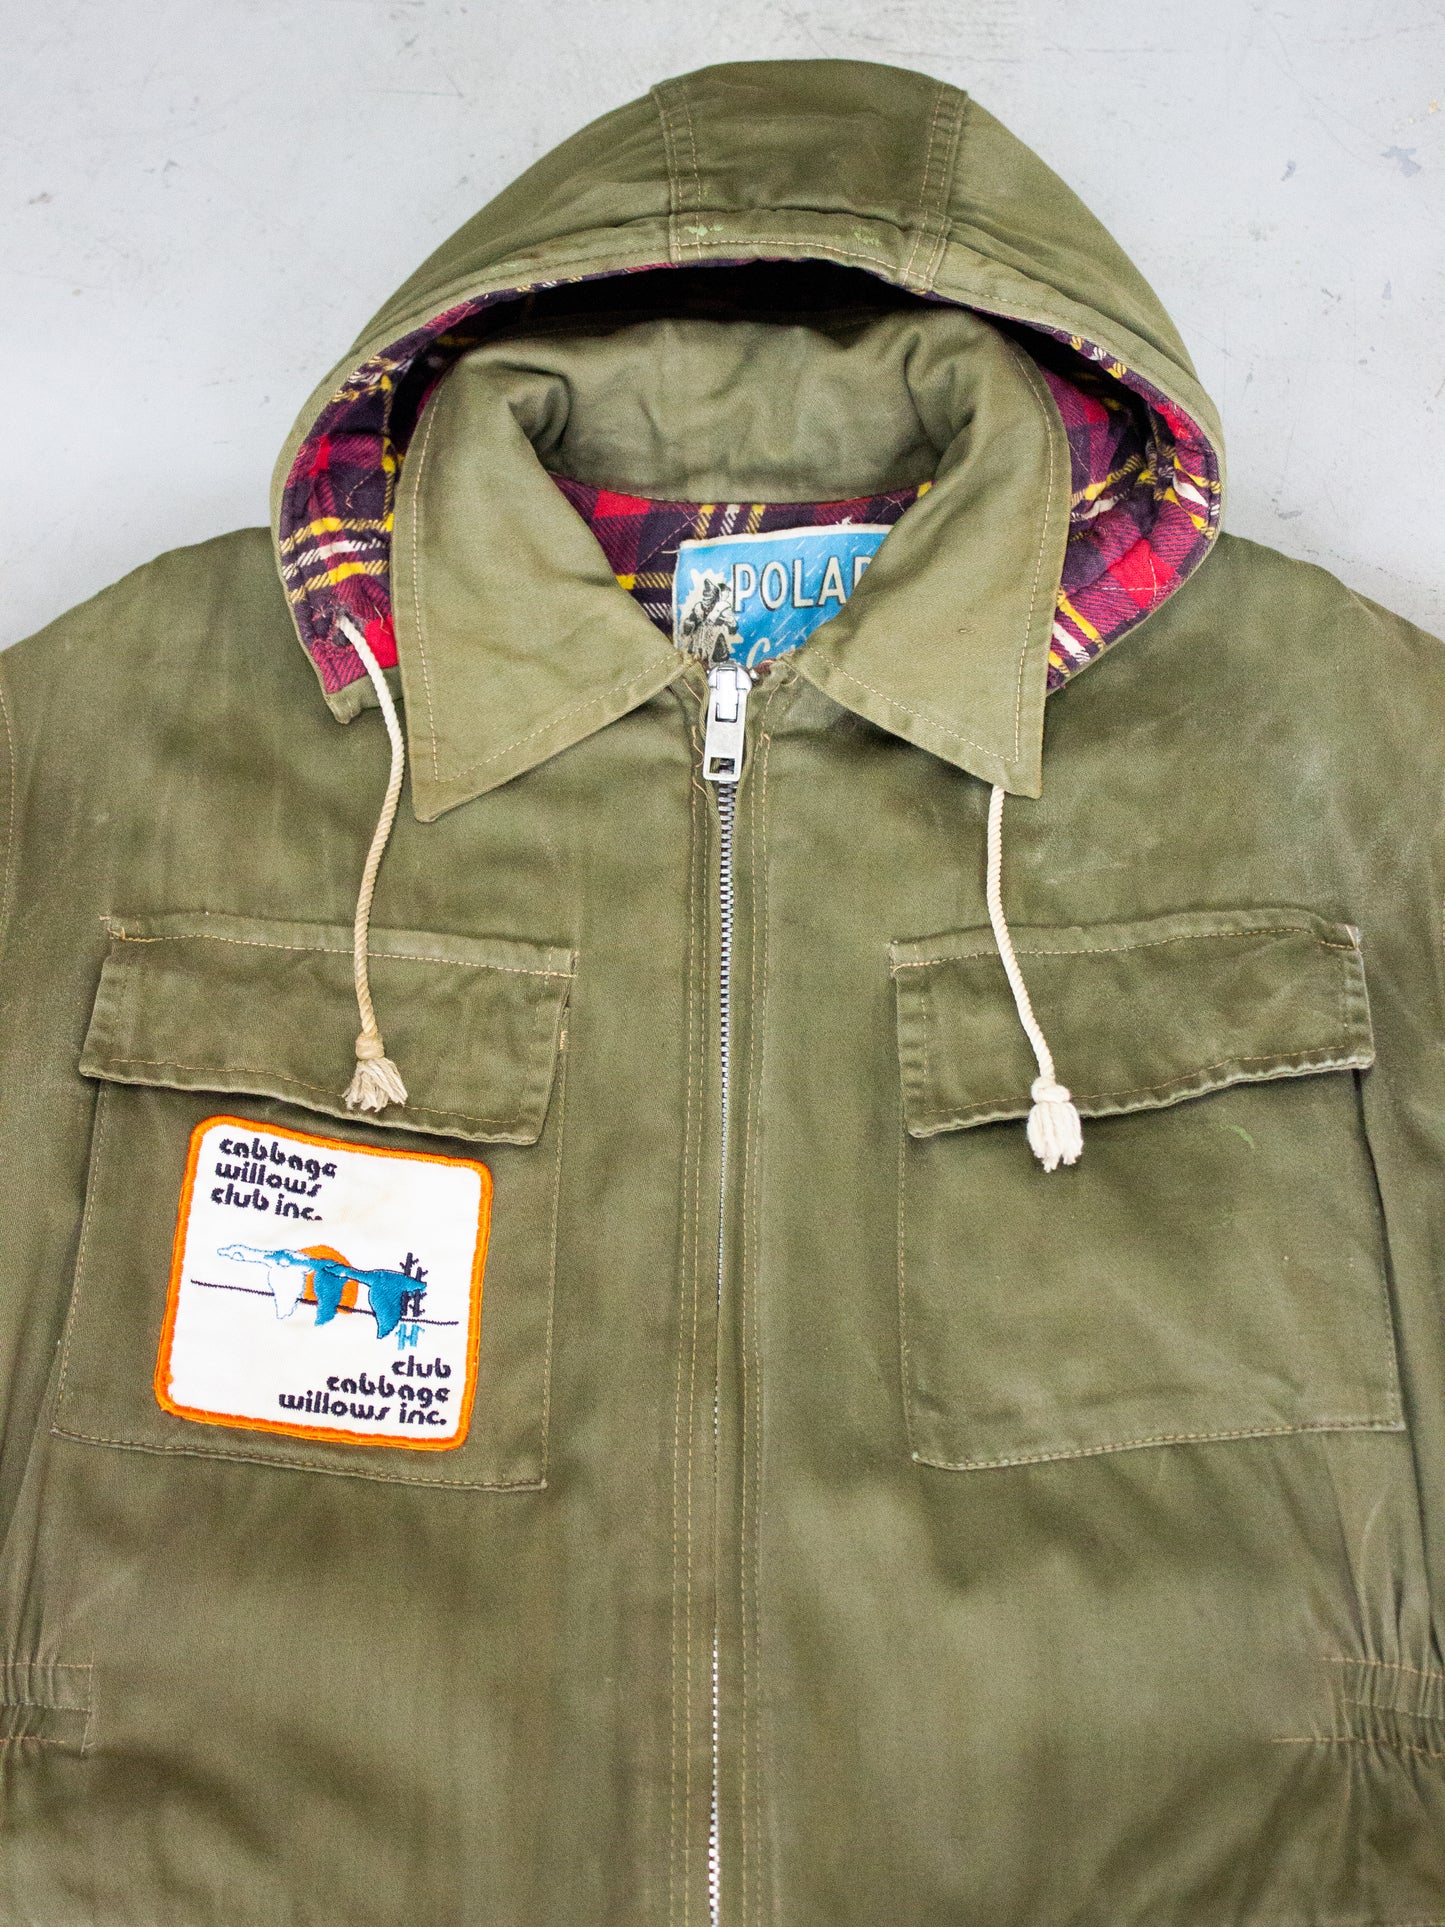 1960's 1970's Polar Garments Hunting Jacket with Plaid Quilted Lining and Patch (Size Medium)